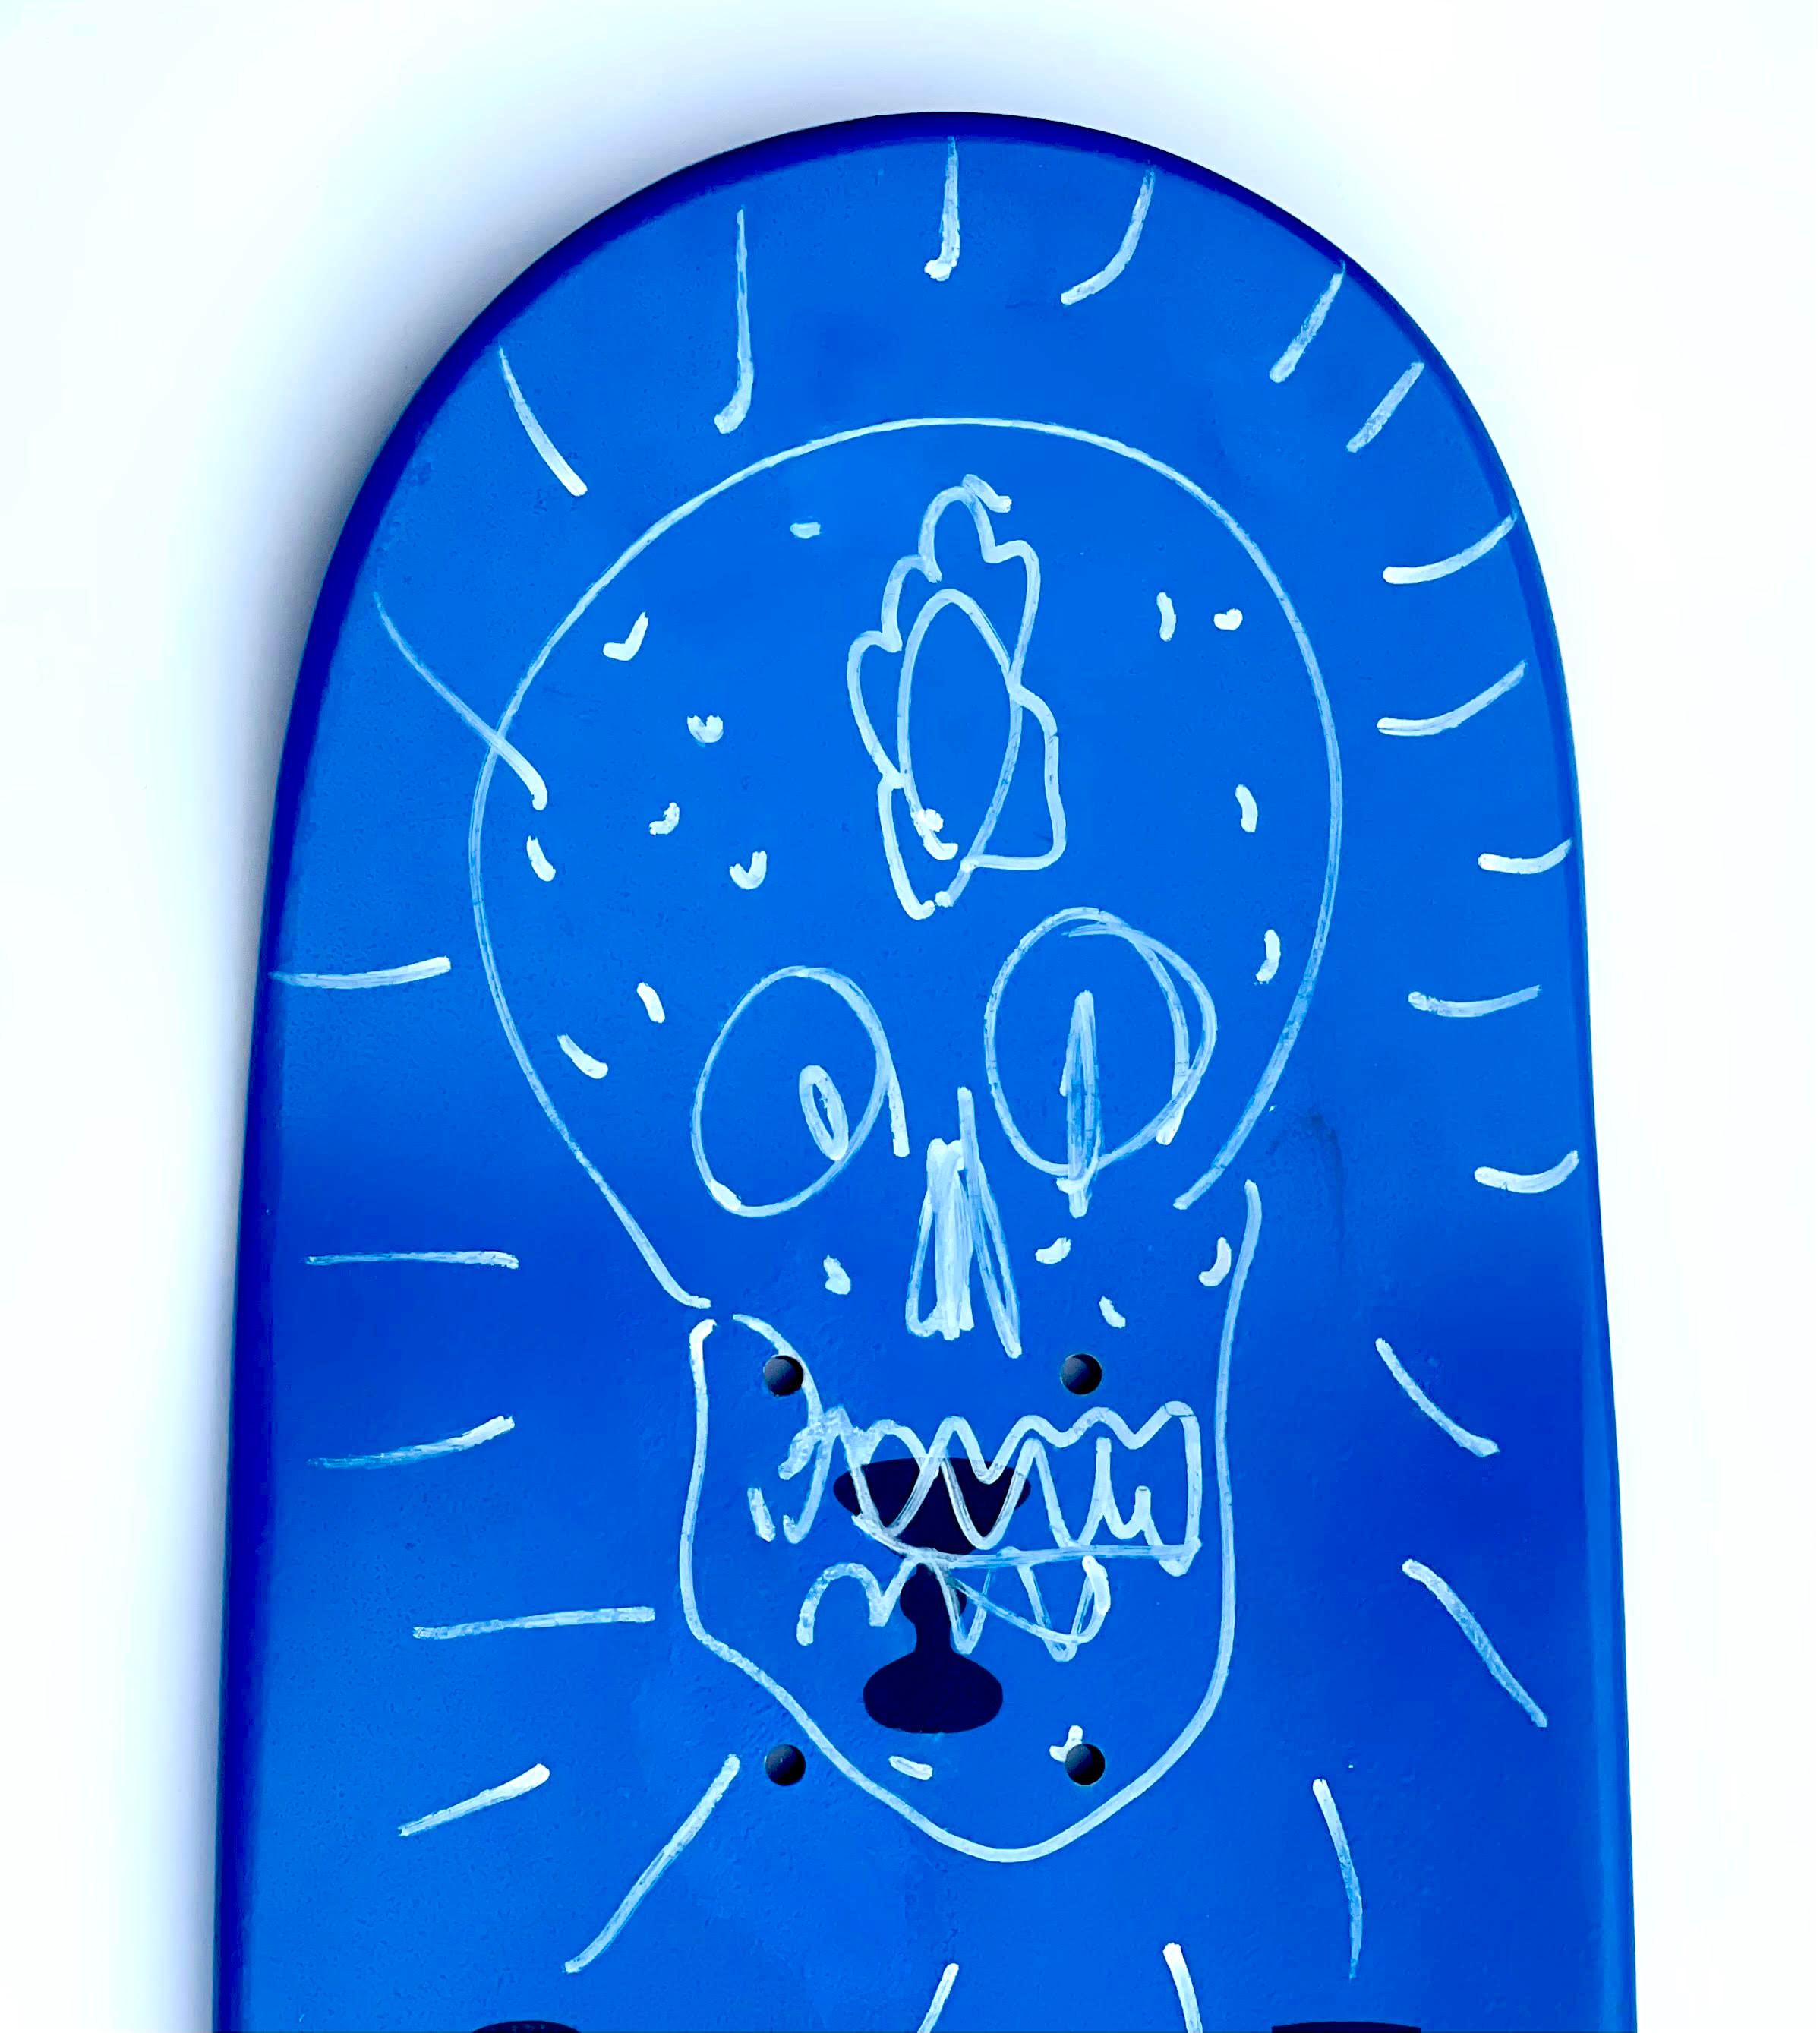 Damien Hirst
Butterfly Skull: Original drawing on limited edition Supreme Spin skateboard, 2009
Mixed Media: Unique hand signed drawing of skull and butterfly on polychrome wood skateboard deck
Hand signed with a skull and butterfly drawing by